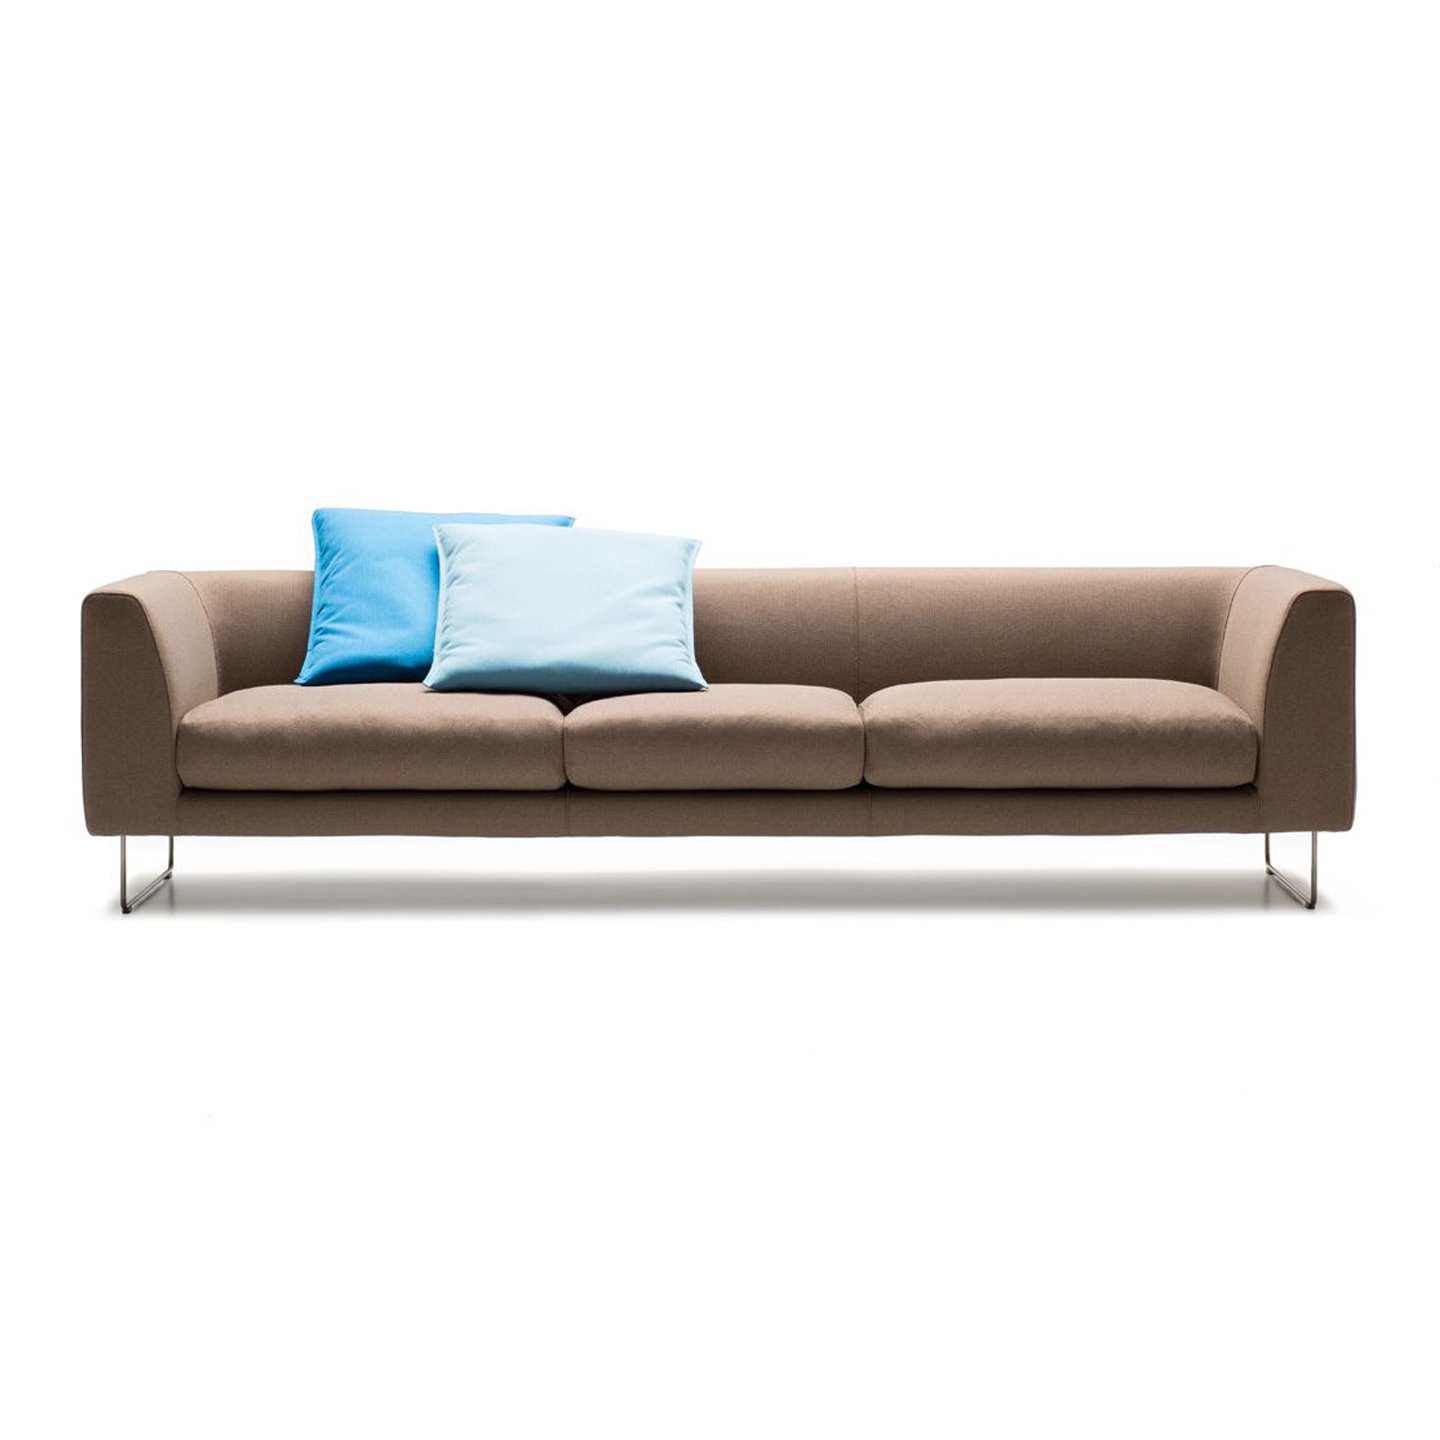 Haworth Elan three seater sofa in brown upholstery with blue cushions